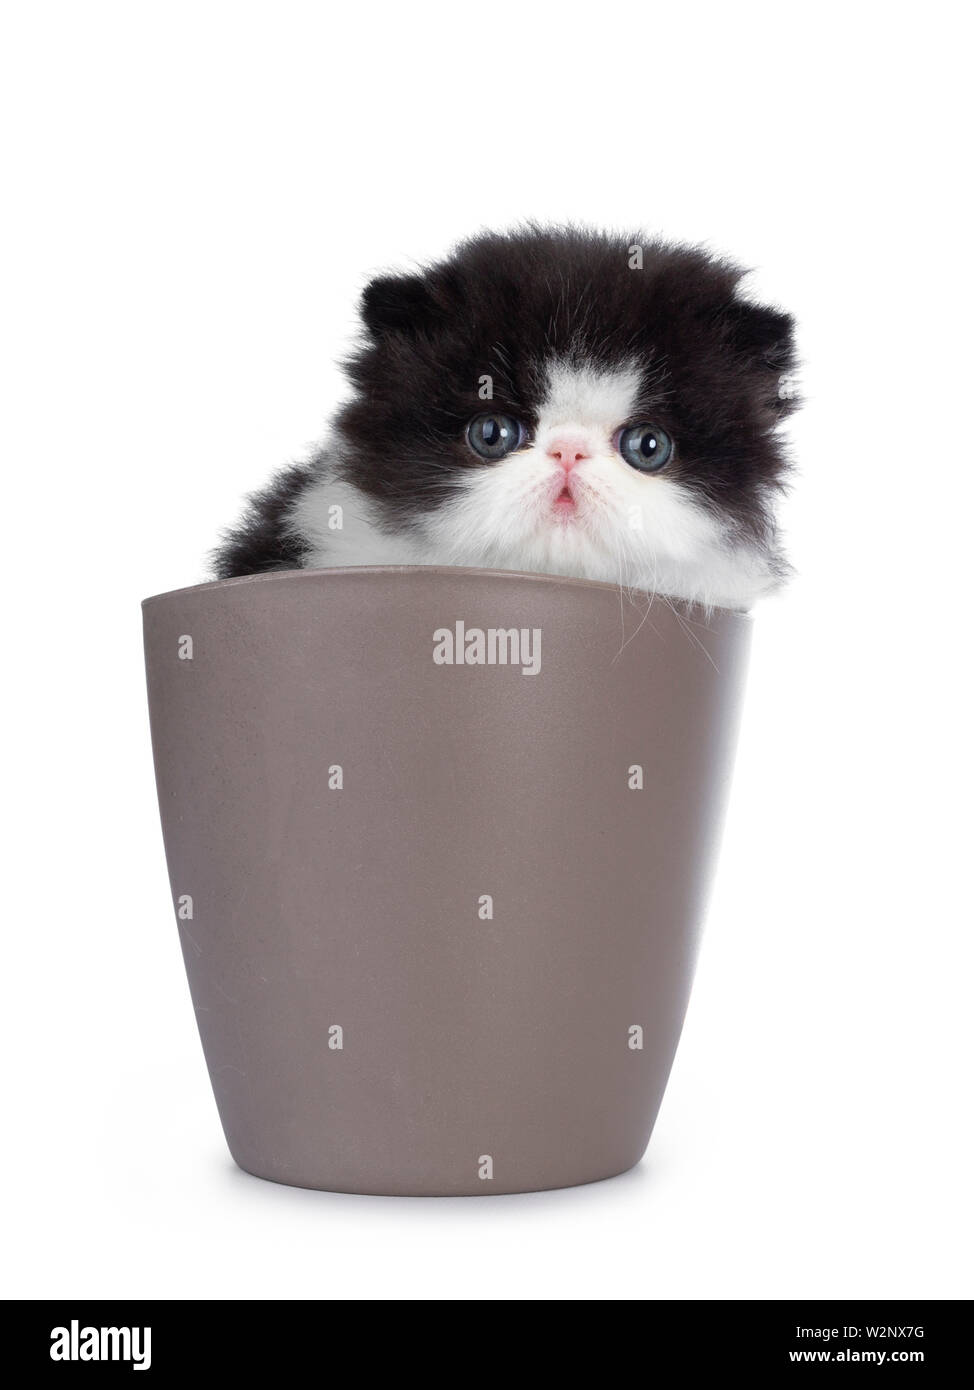 Cute few weeks old, very young black and white Persian cat ktten. Sitting in brown flower pot, looking at camera with round and still blue eyes. Isola Stock Photo